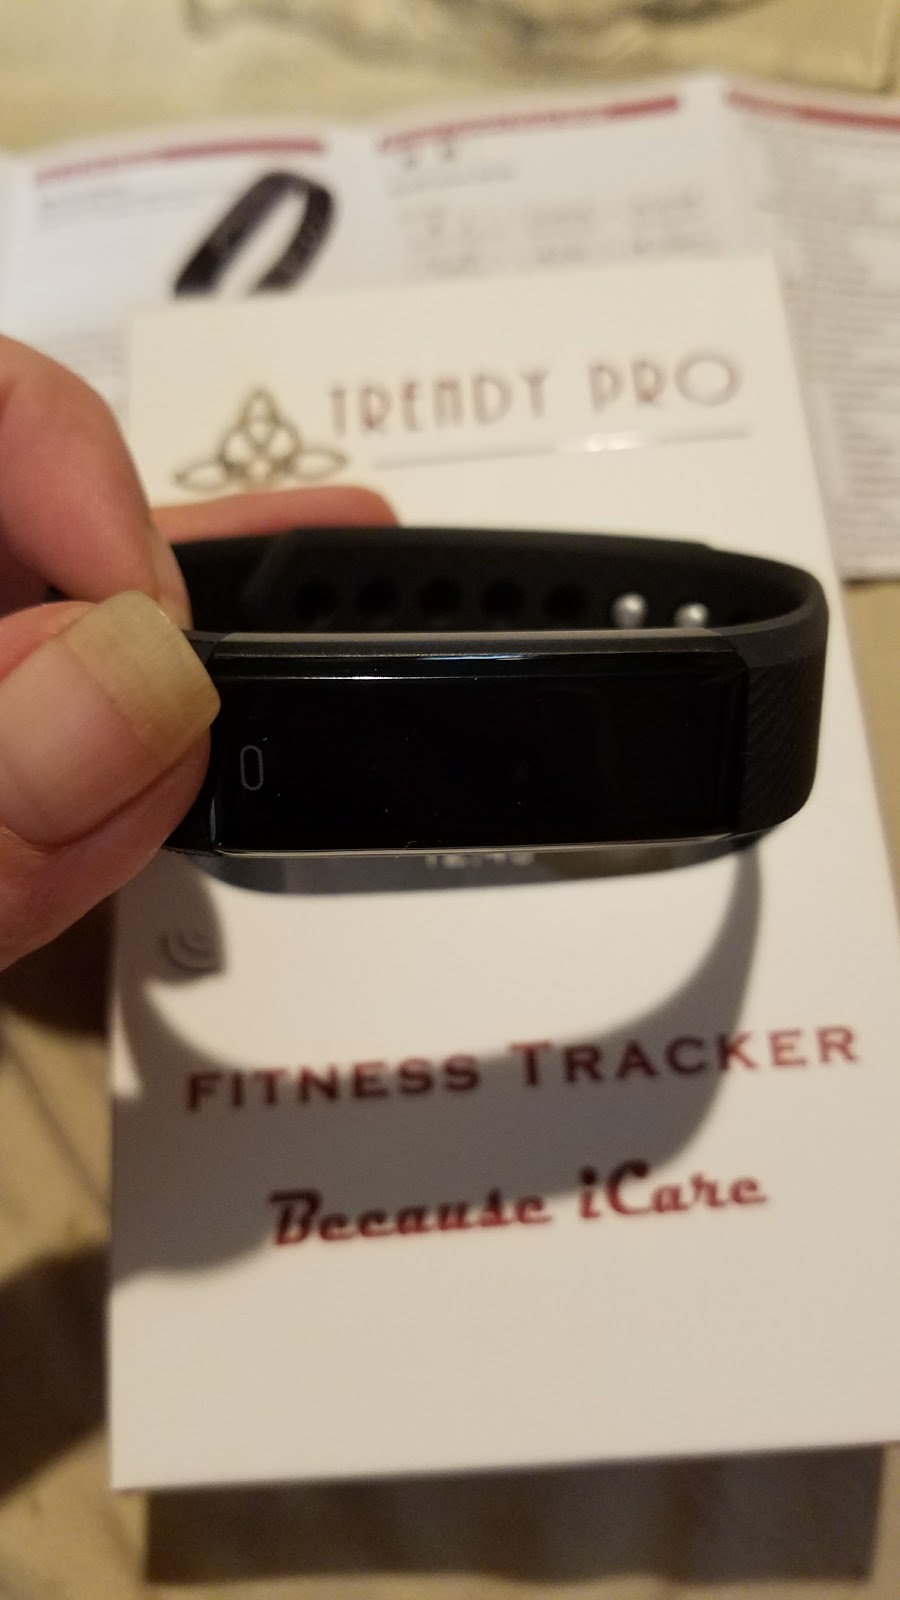 Trendy Pro Fitness Tracker -Because icare